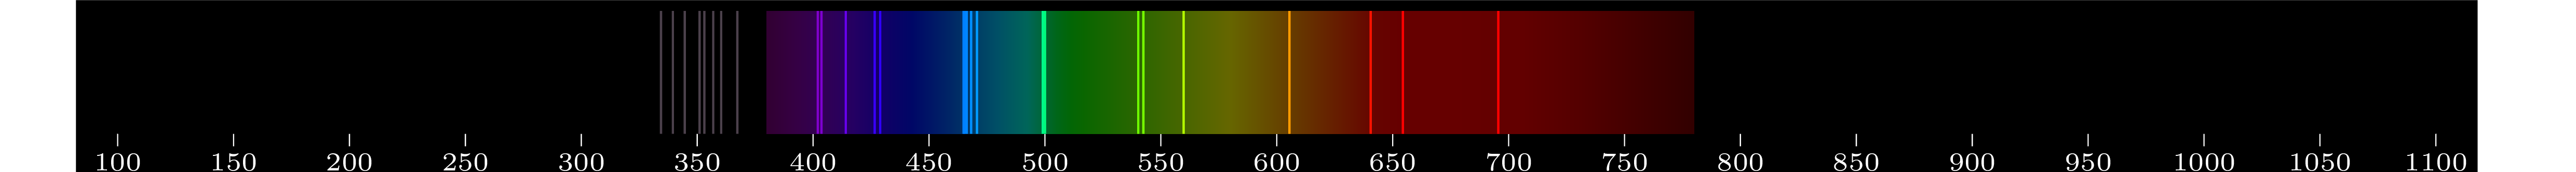 emmision spectra of element Am